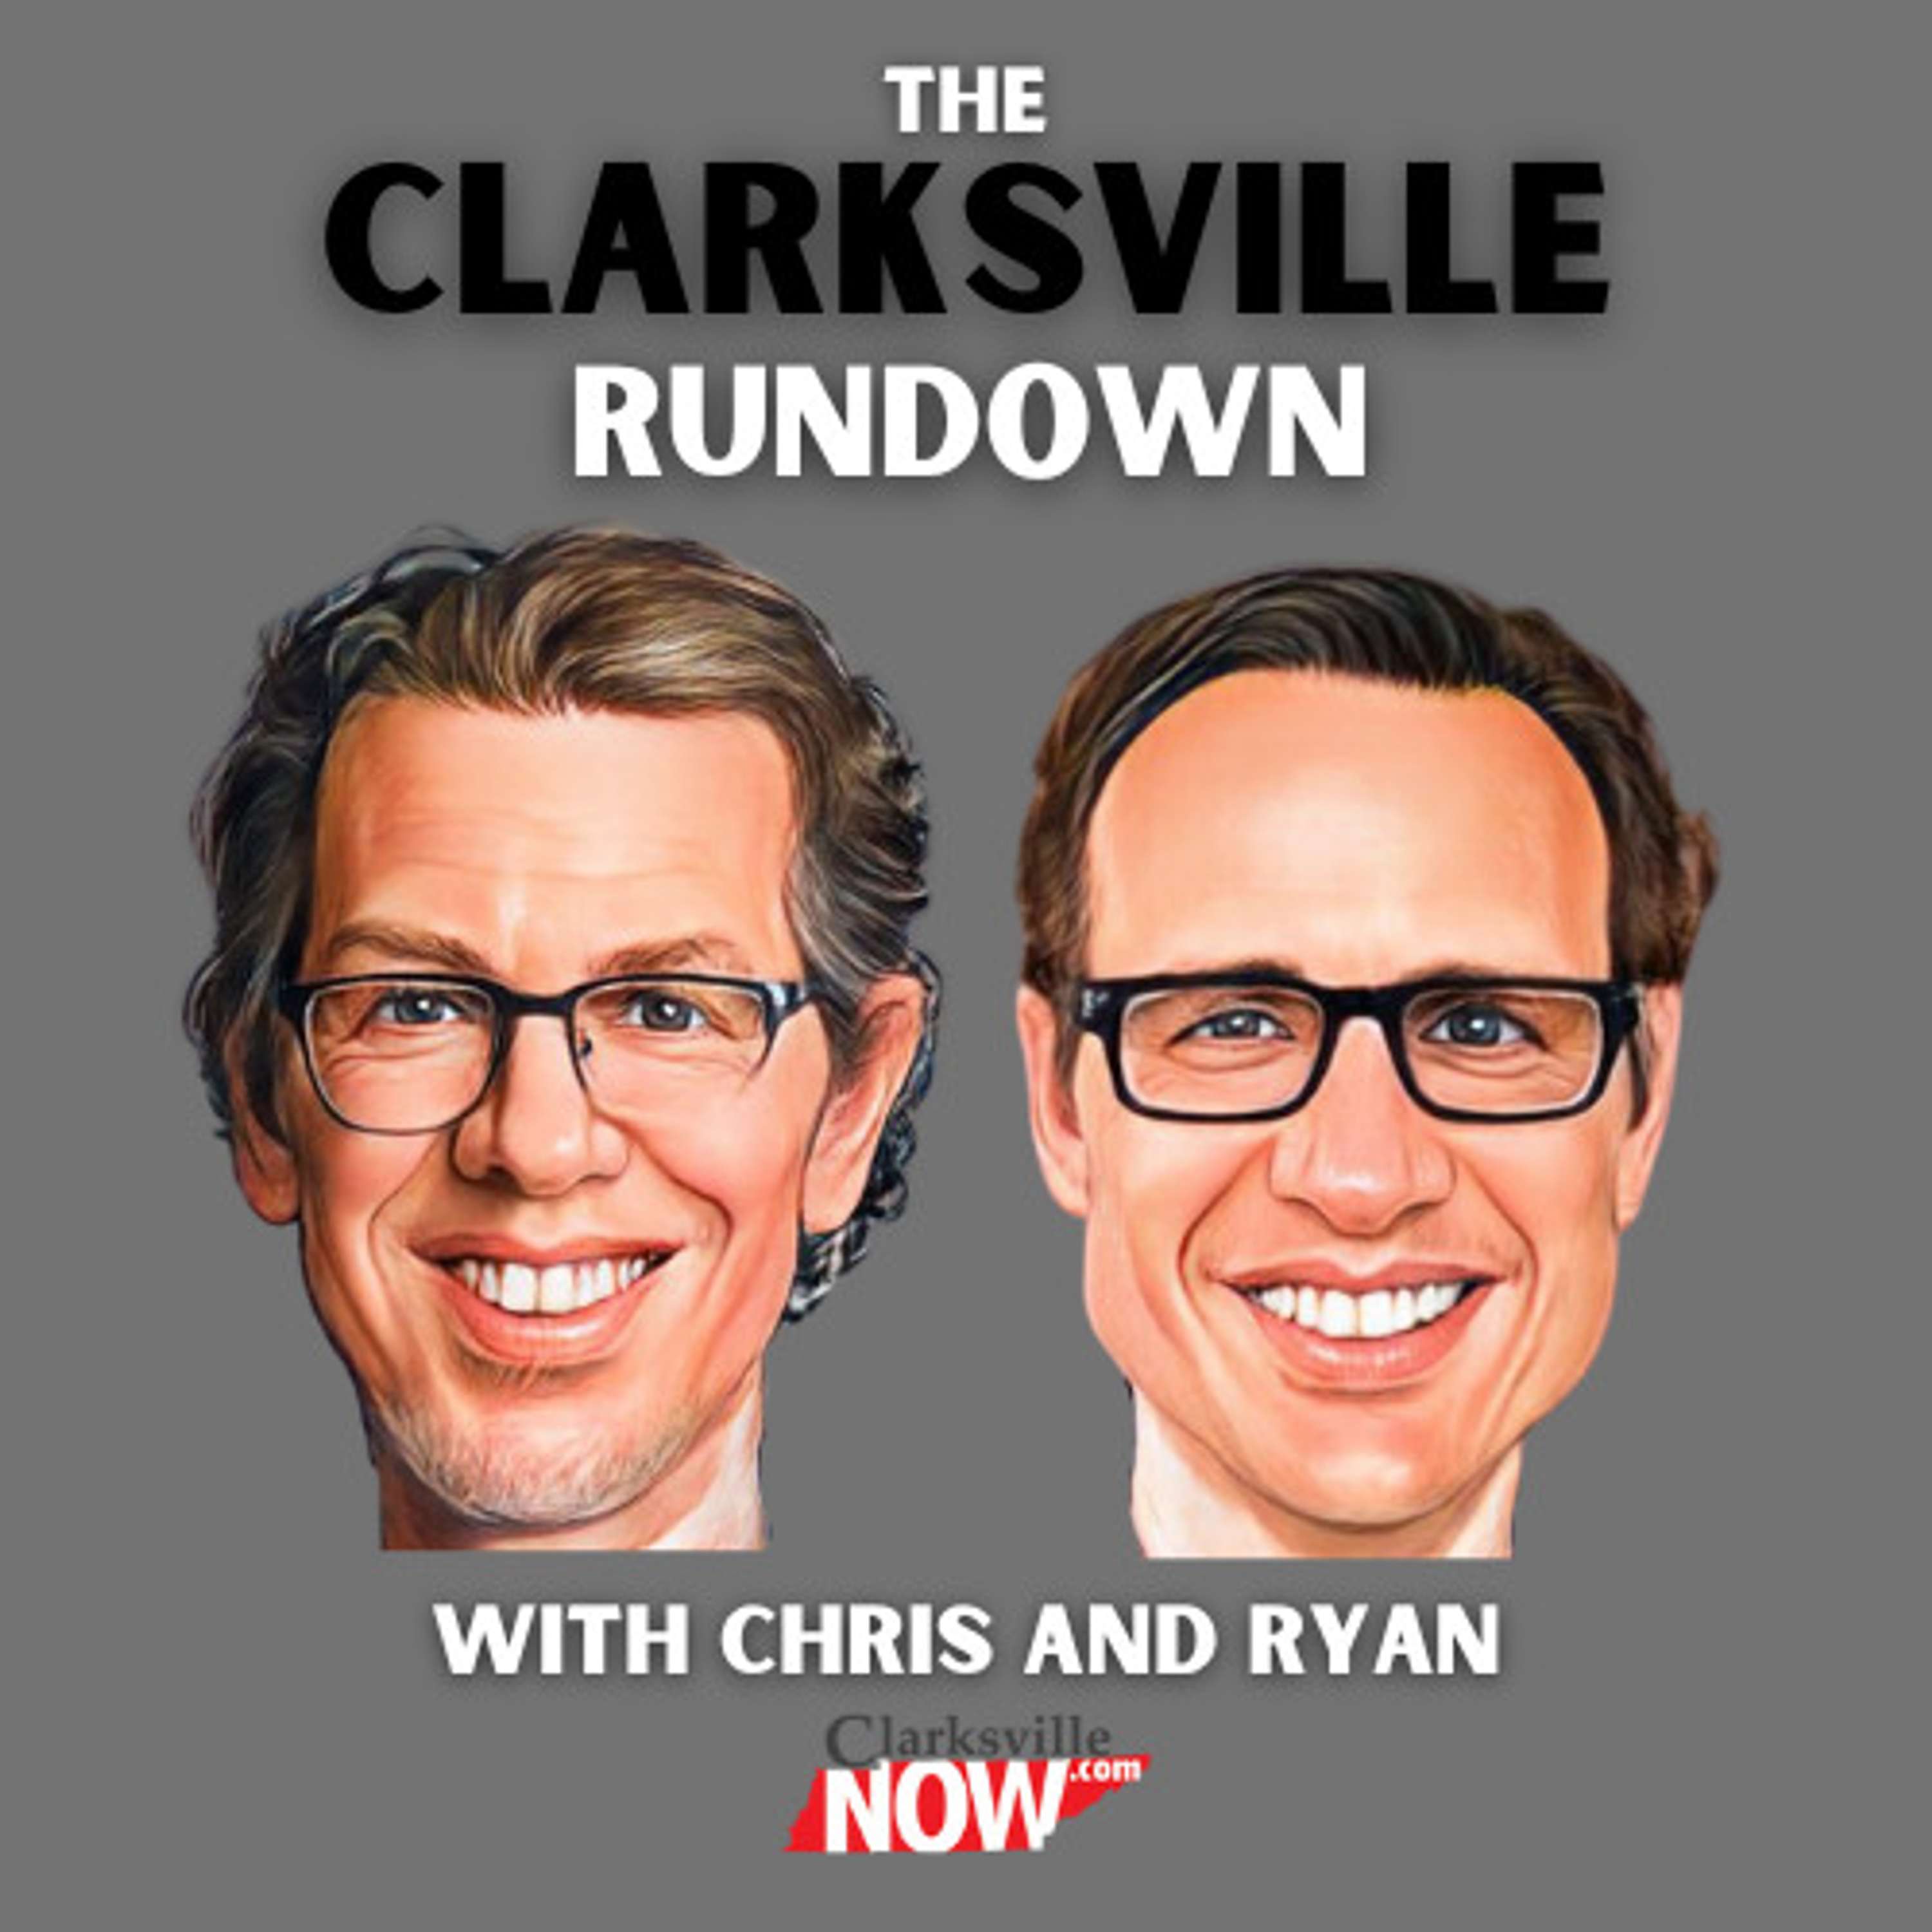 The Clarksville Rundown with Chris and Ryan